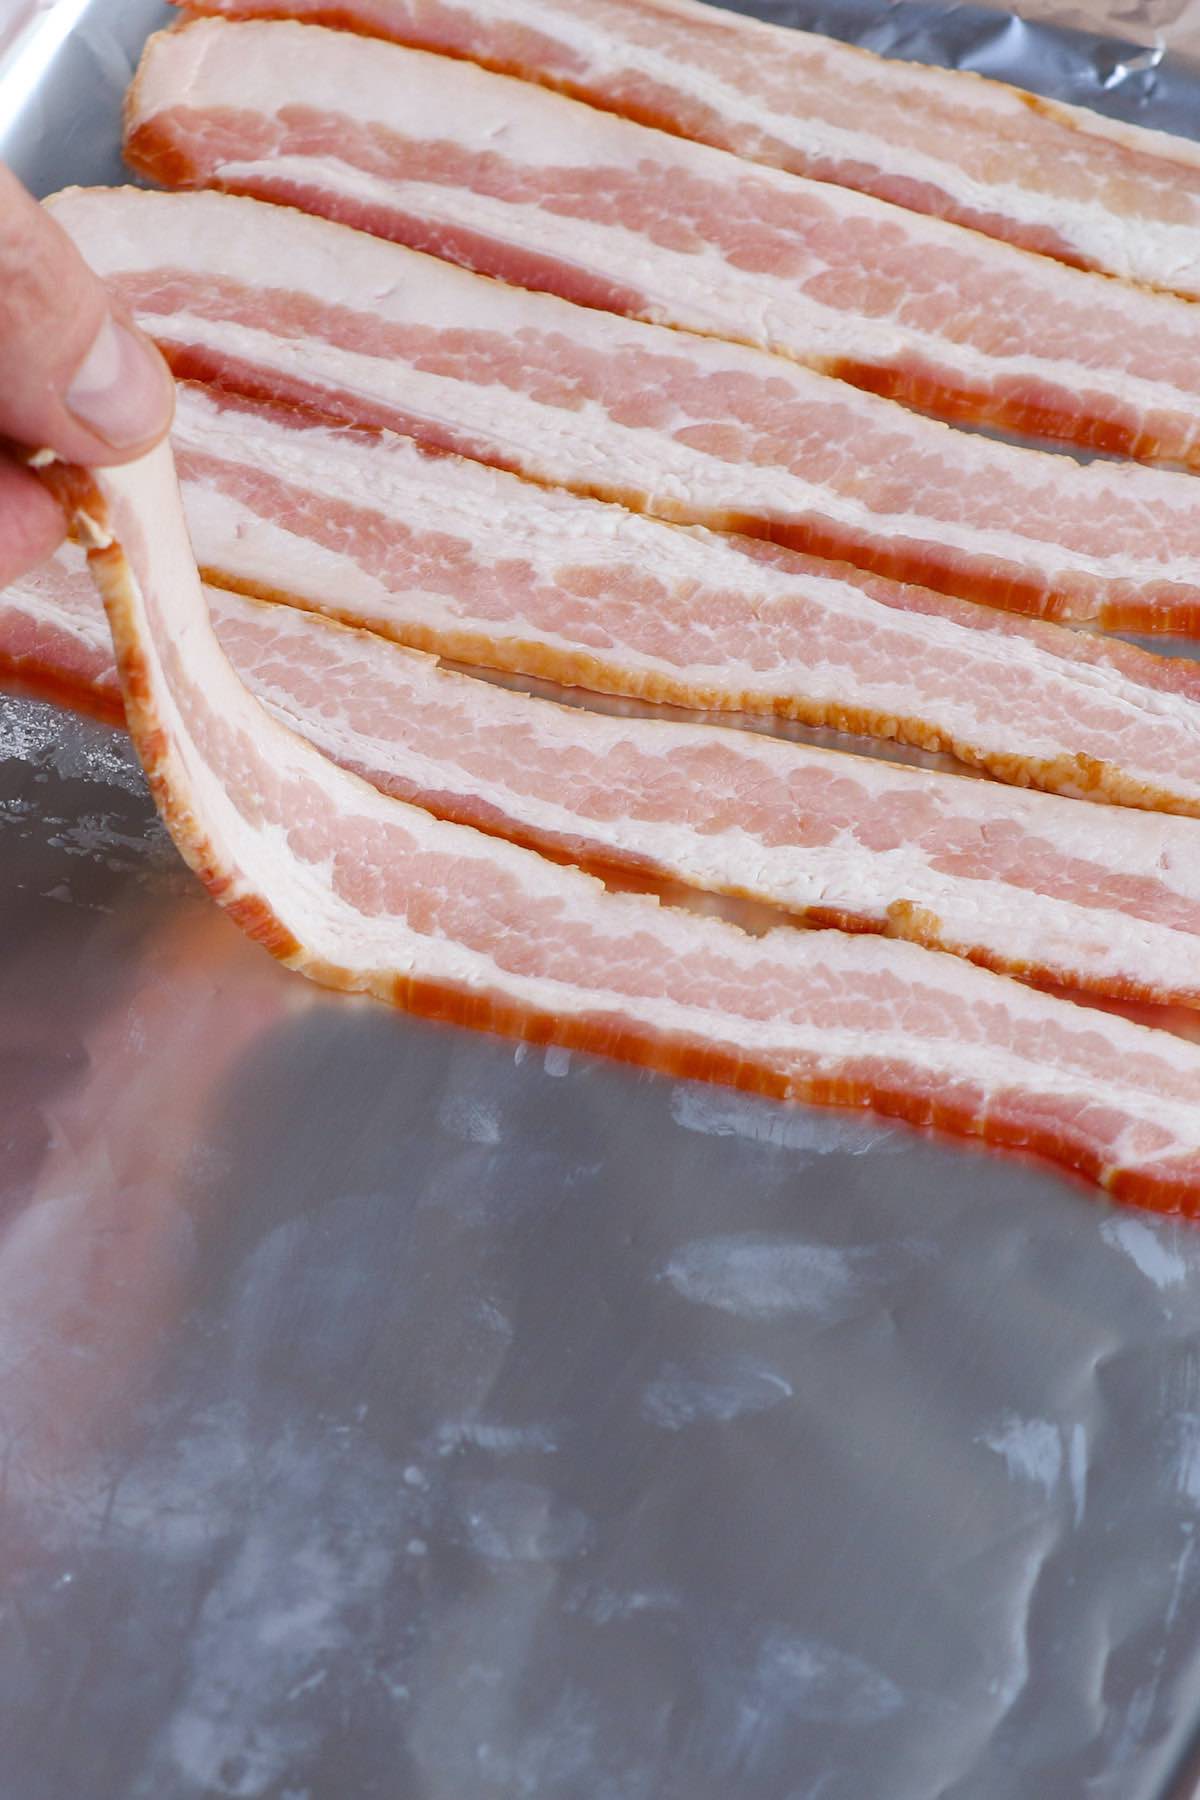 Photo showing putting the bacon directly into the baking dish covered with foil.